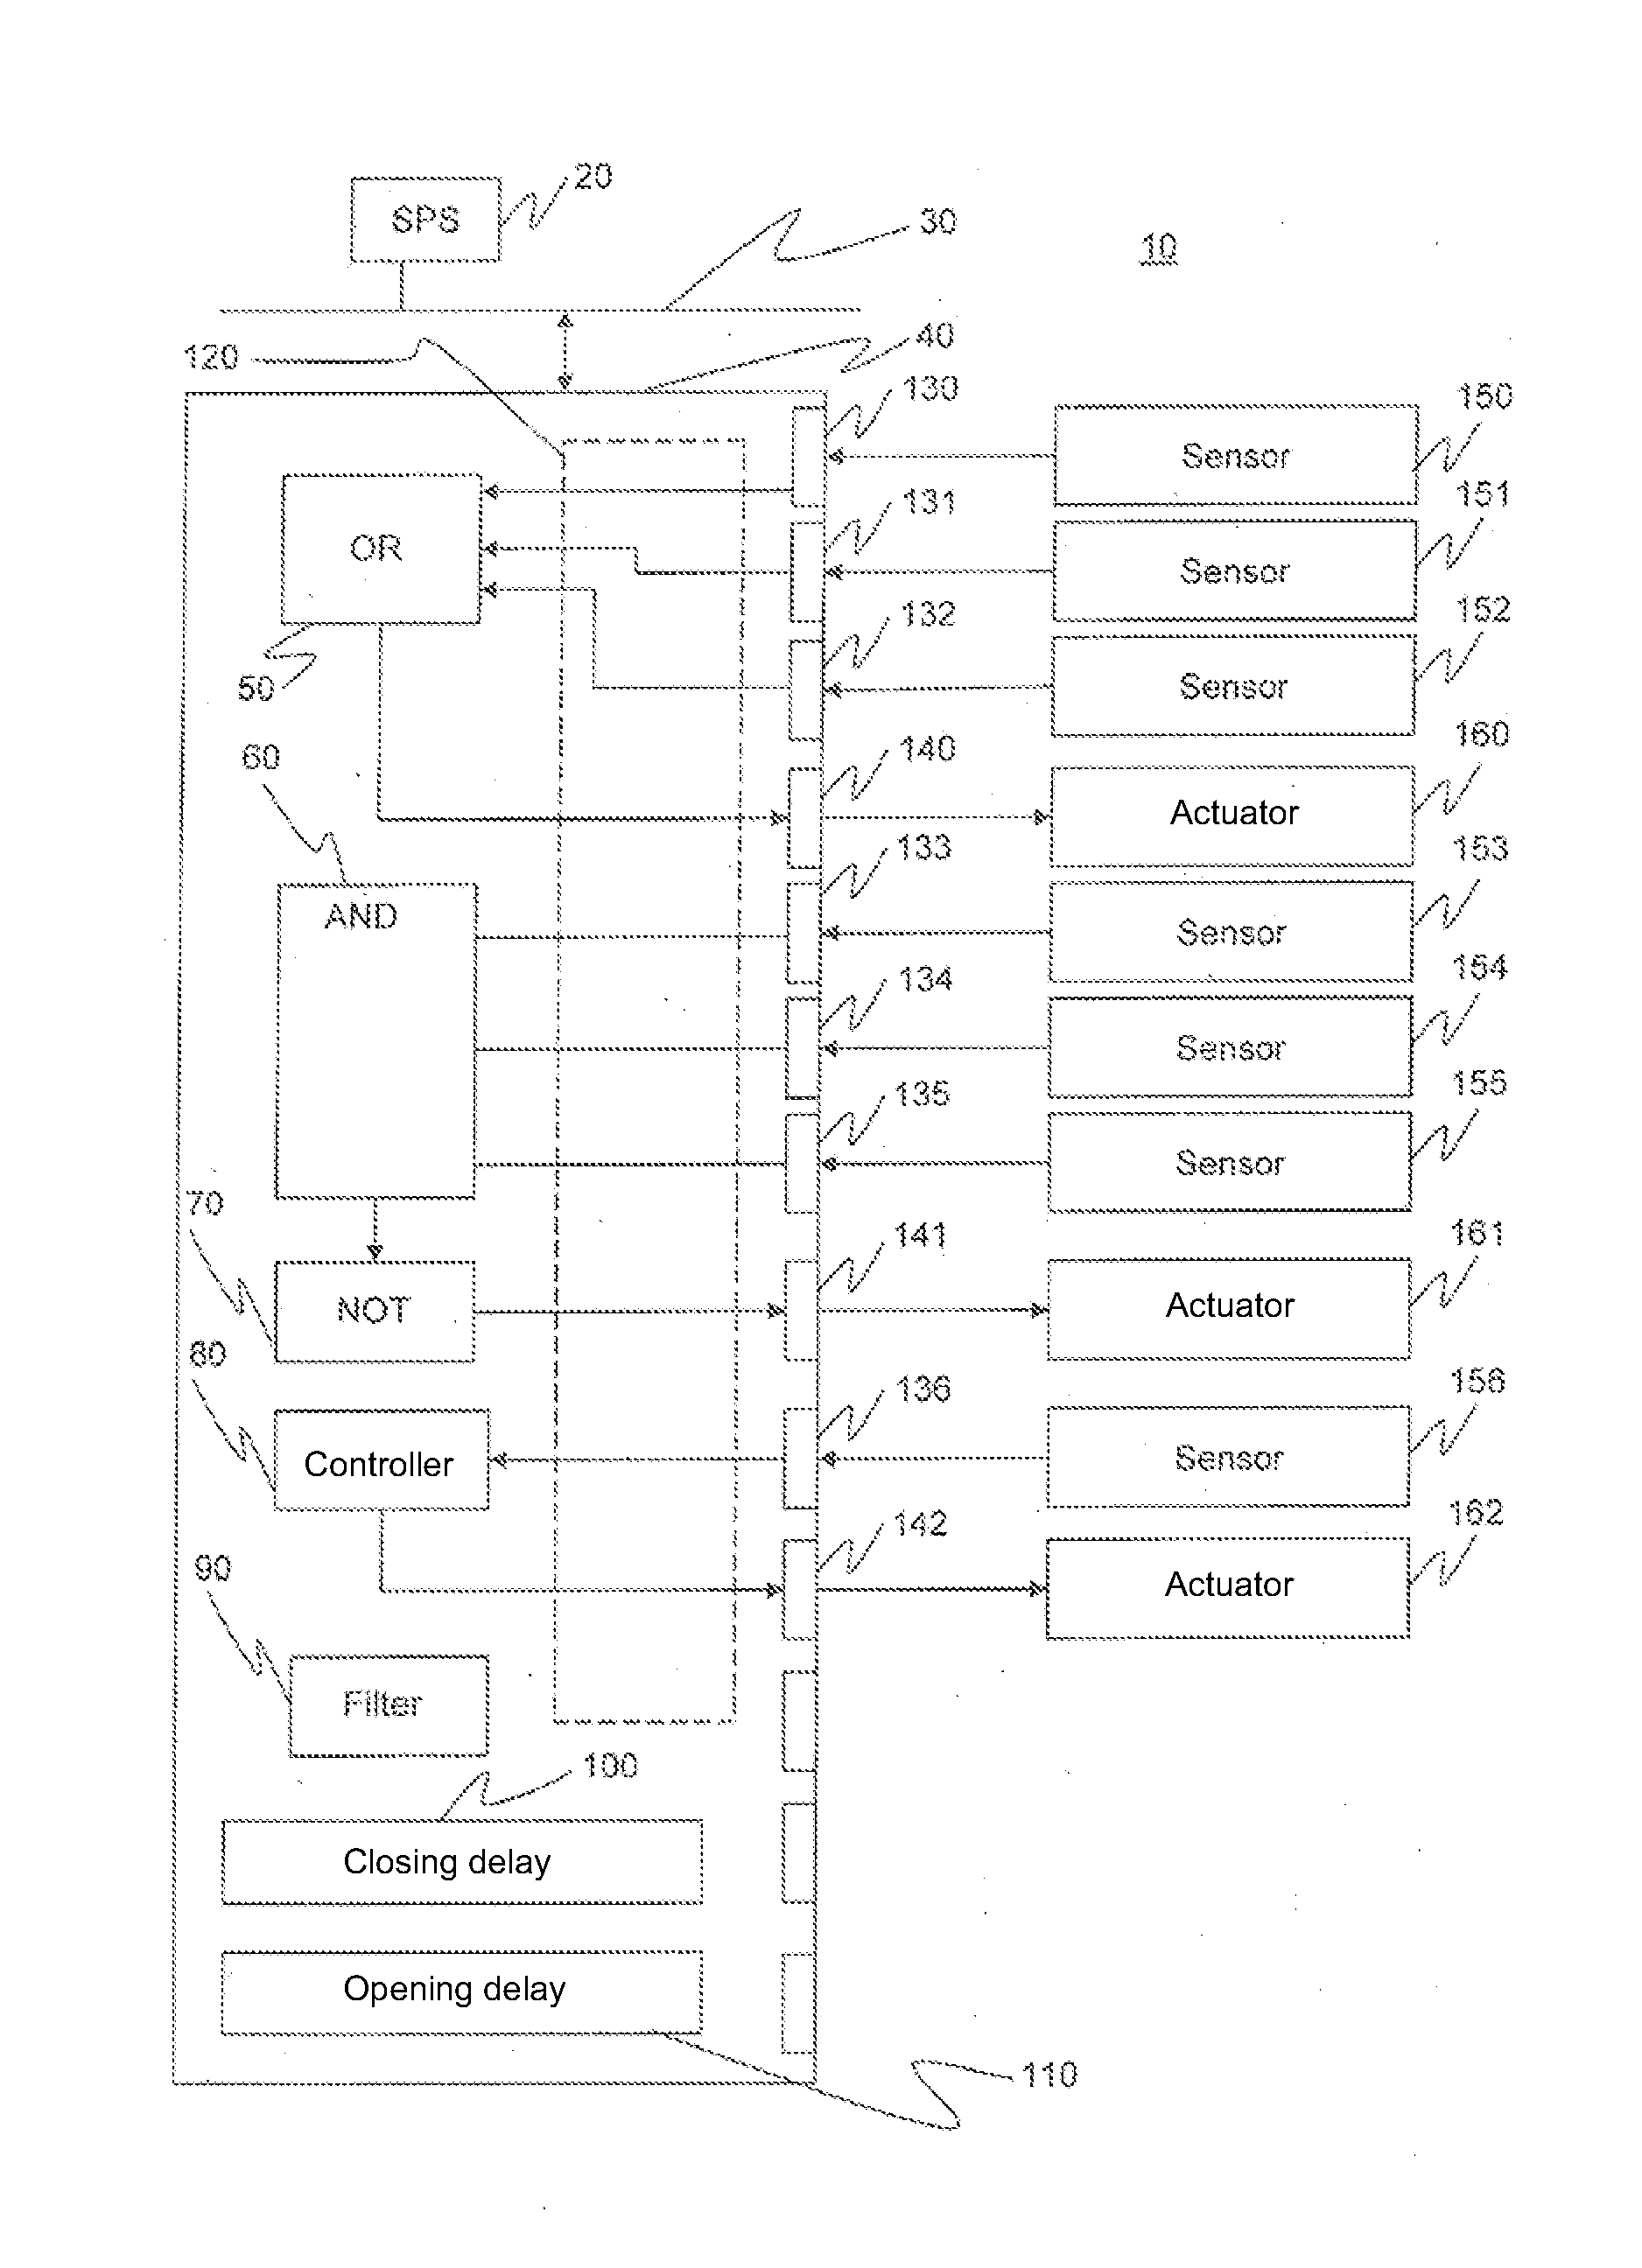 Communication system for connecting field devices to a higher-order control device